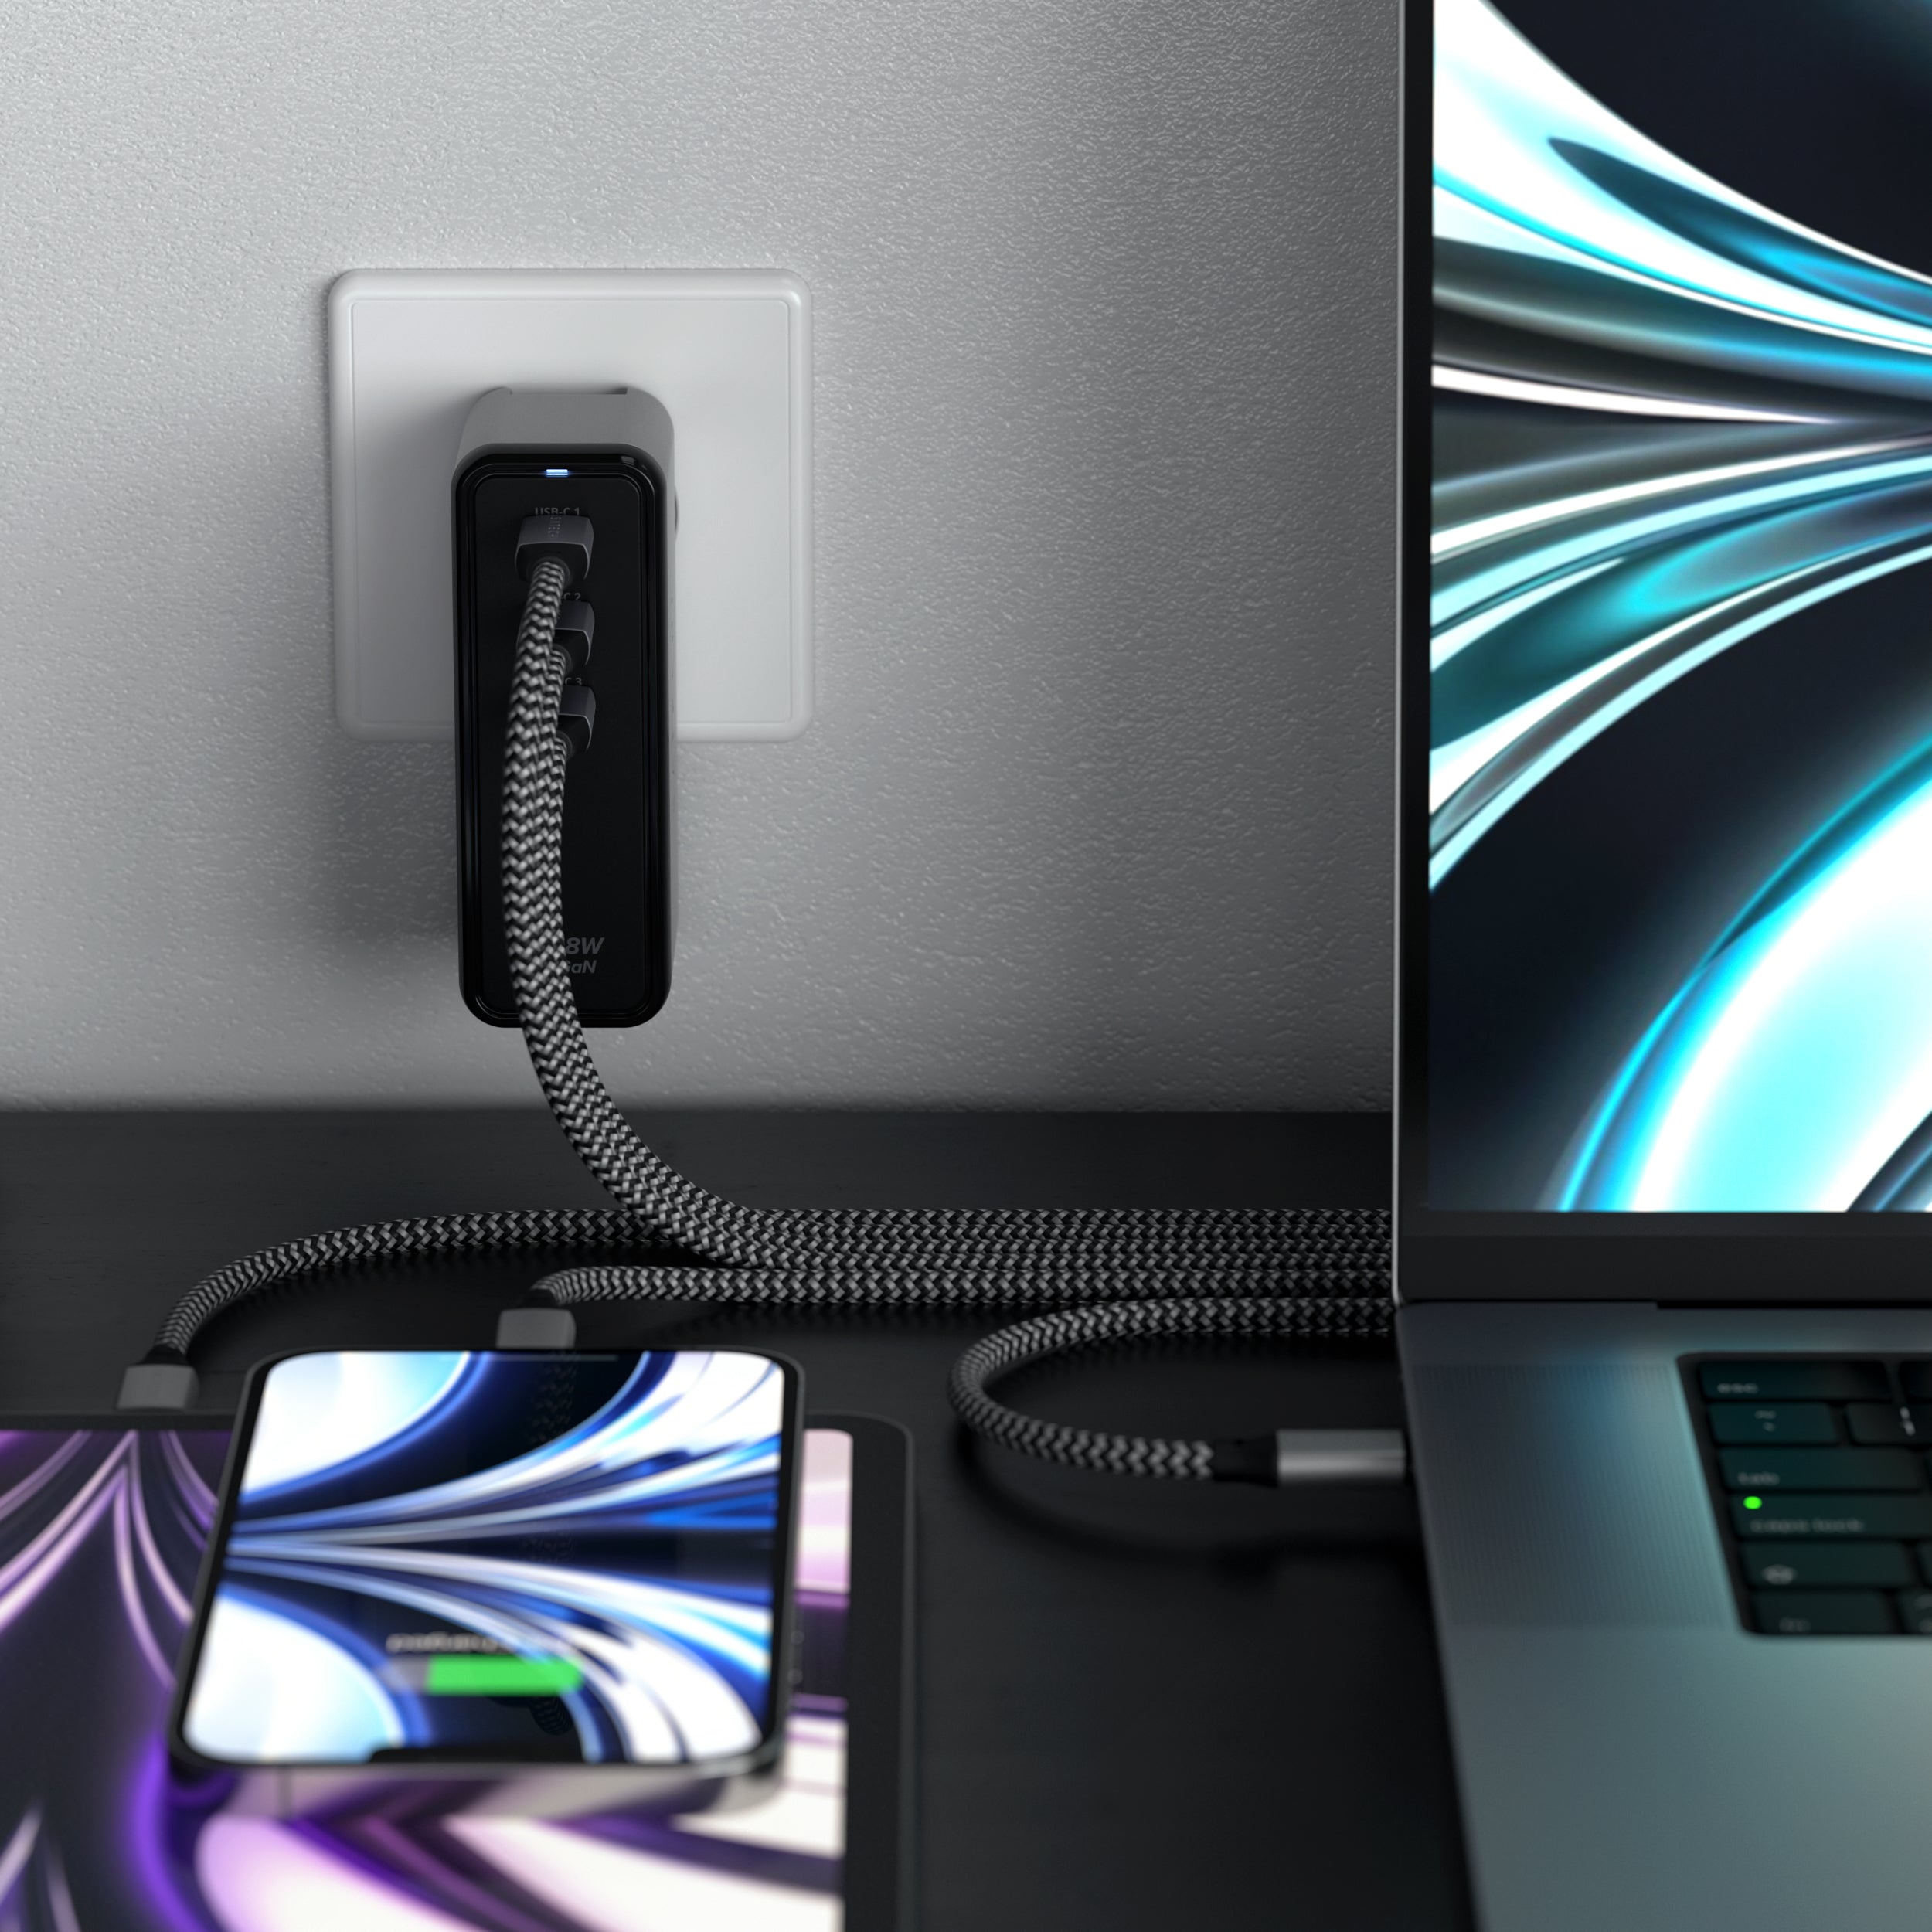 Supercharge your setup with the Satechi 108W USB-C 3-Port GaN Wall Charger, featuring Gallium Nitride (GaN) technology to power up to three devices simultaneously. Equipped with three USB-C PD ports to support multiple configurations up to 108W, the charger can easily power your 16-inch MacBook Pro at full speed, or your iPad Air setup on-the-go, so you can keep working while your devices are charging. 